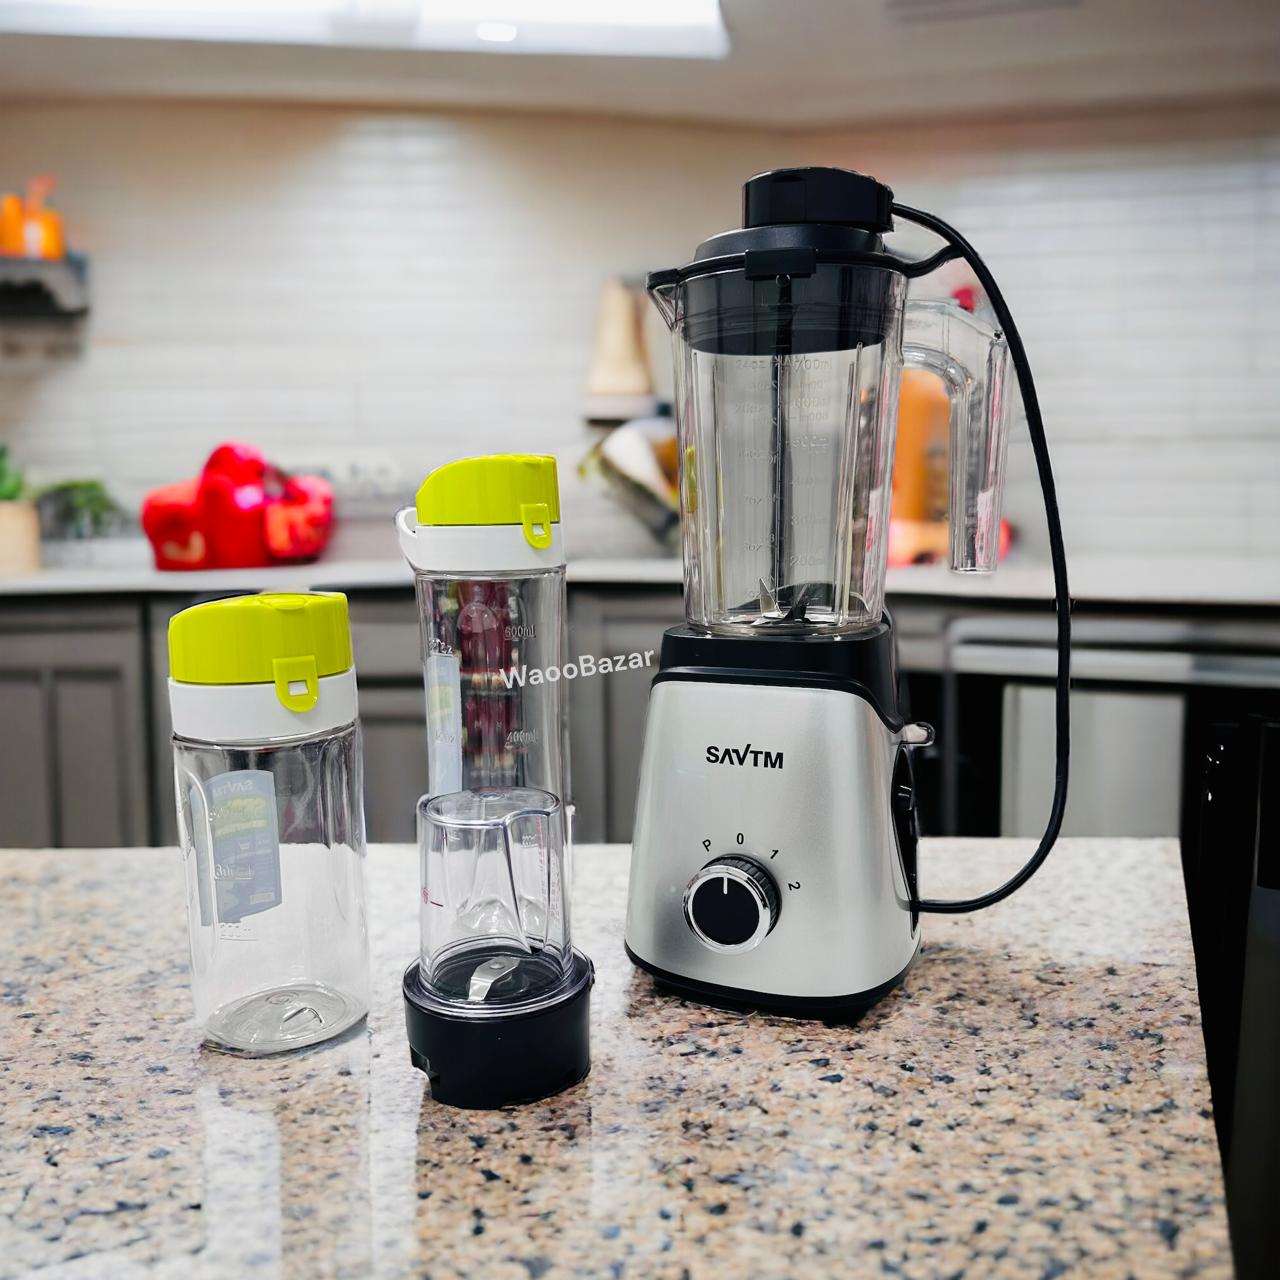 SAVTM Vacuum Food Processor | Mixing Cup, Preservation Tumbler, & Dry Grinding cup